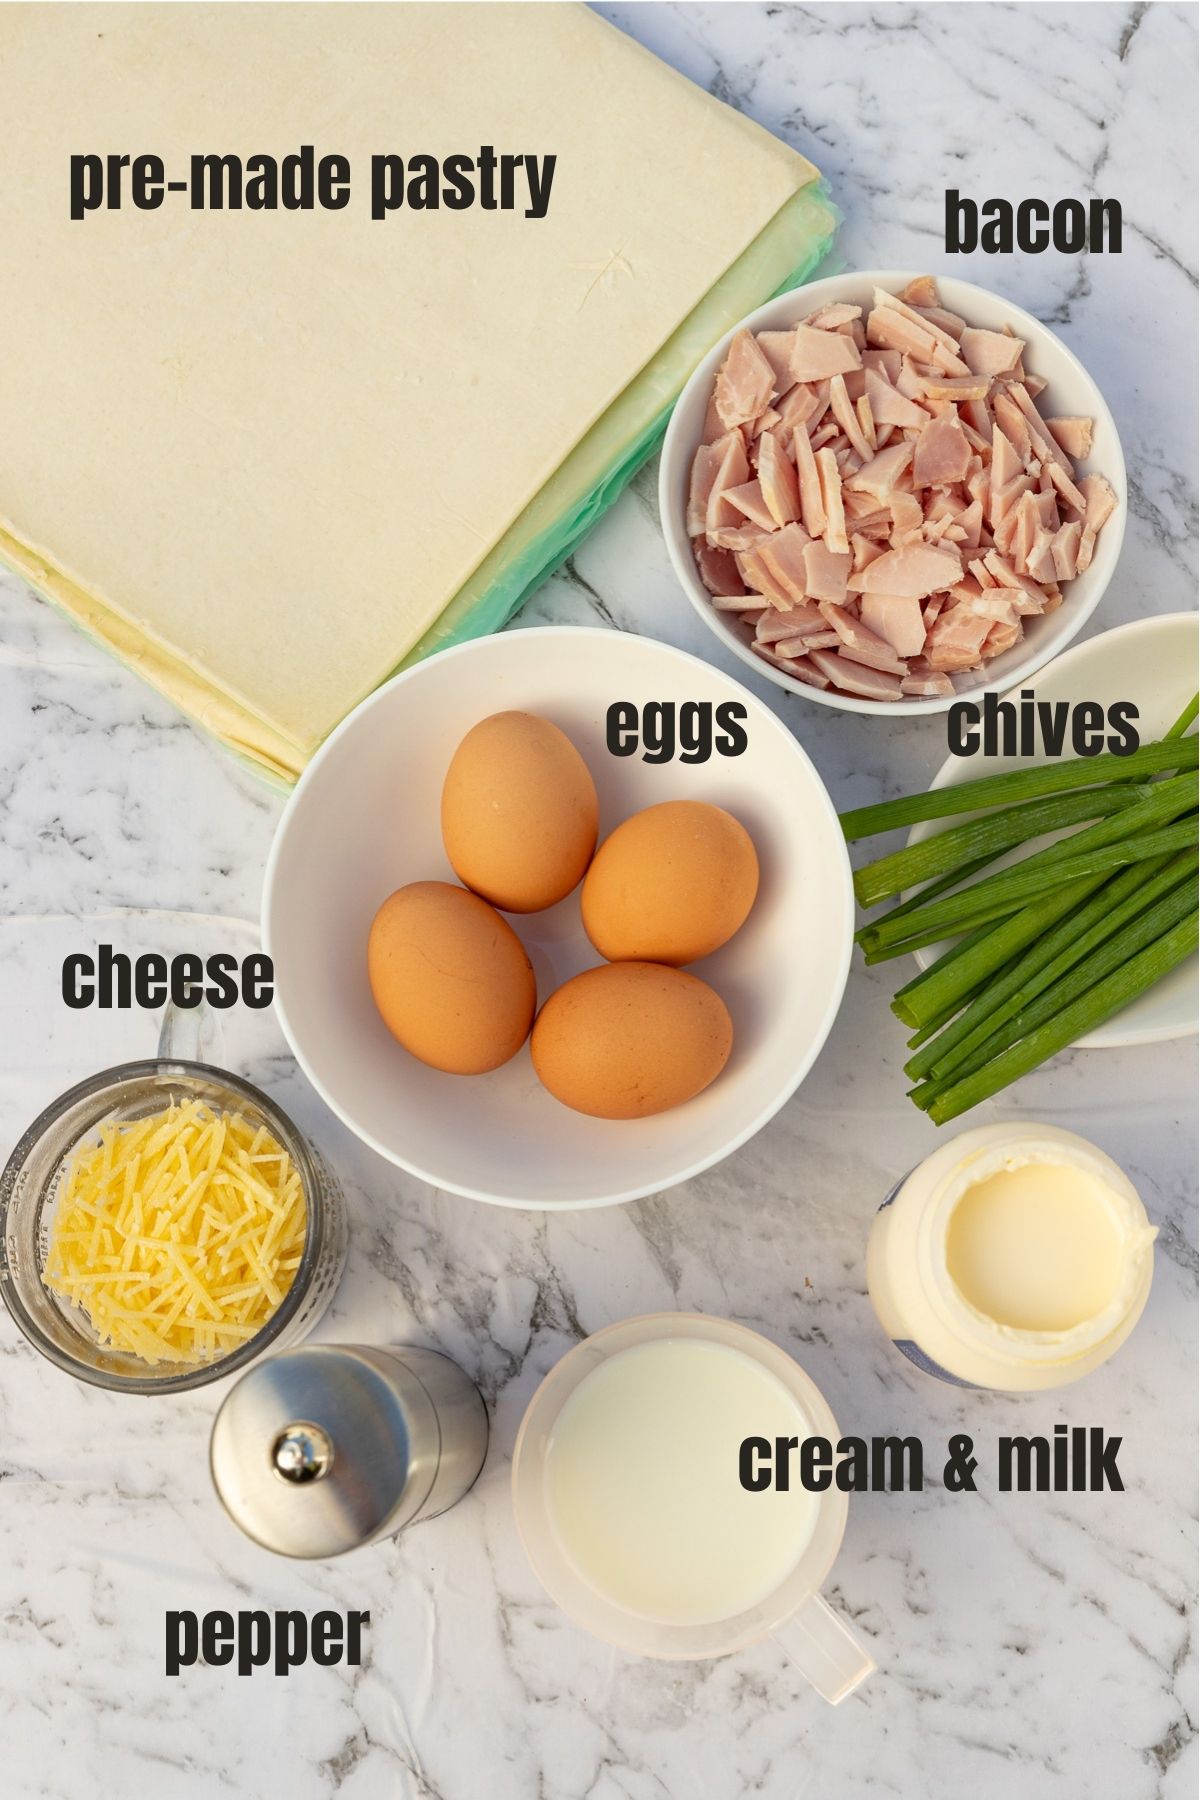 All the ingredients for mini quiche from above on a marble background including cream and milk, pepper, grated cheese, 4 eggs, chives, bacon and pre-made pastry.